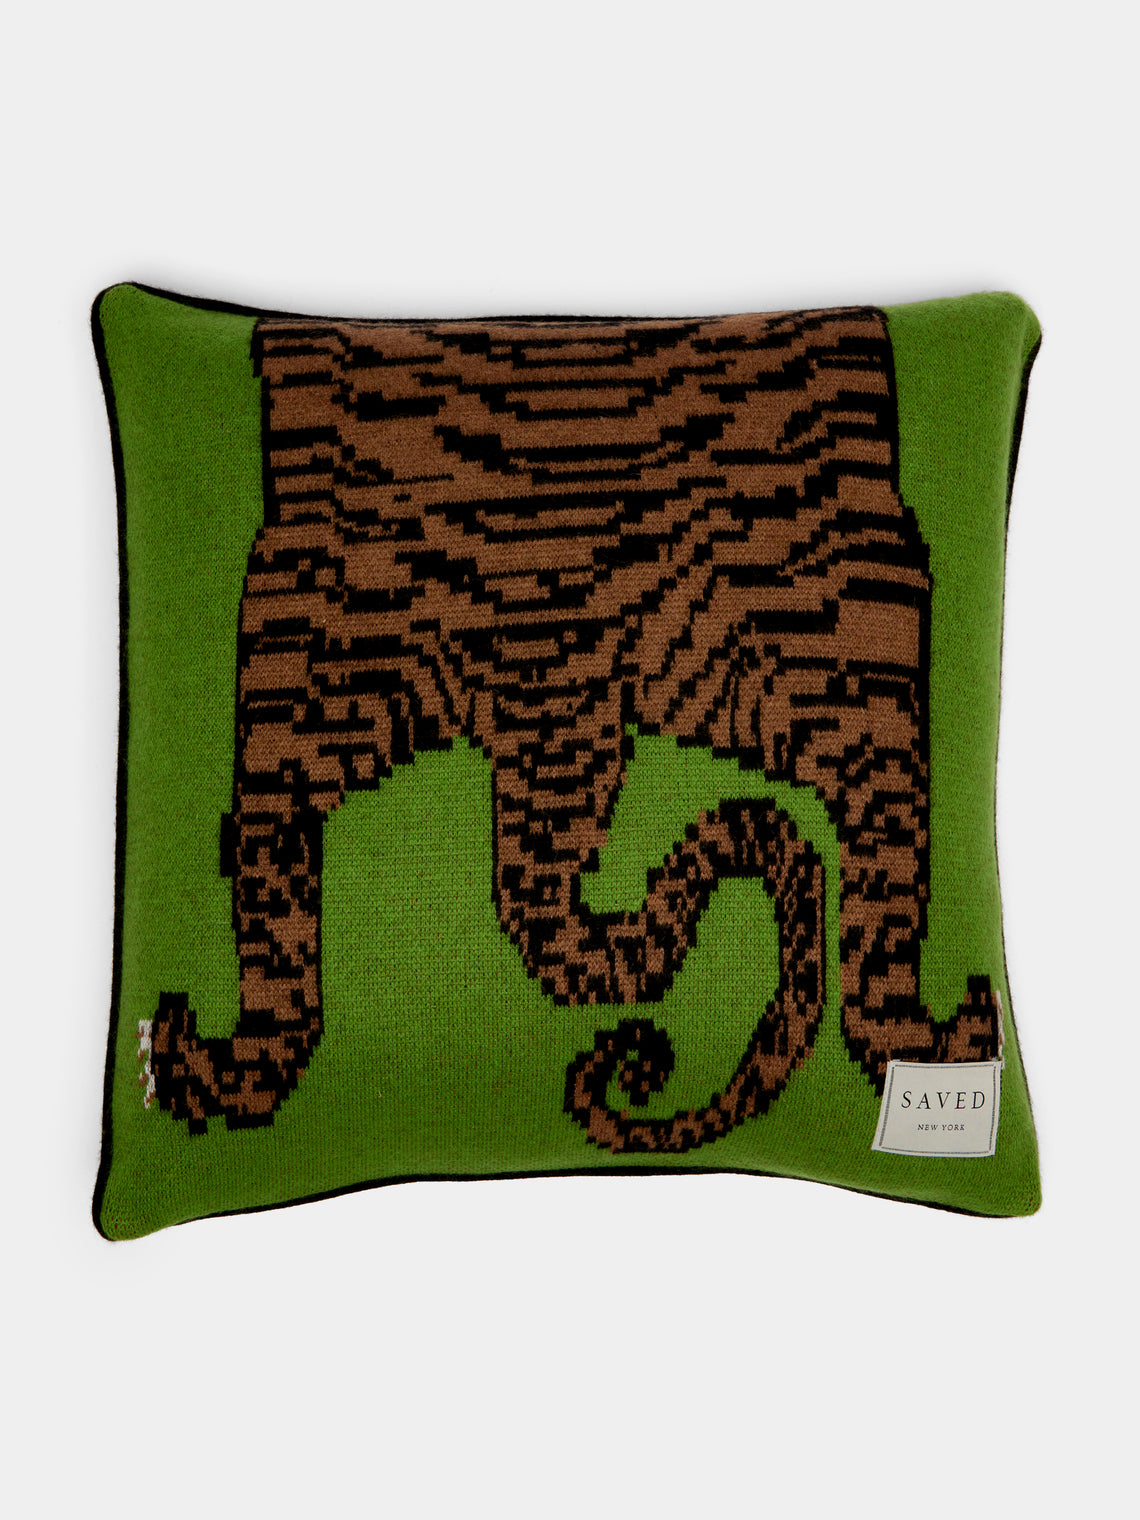 Saved NY - Tiger Cashmere Pillow - Green - ABASK